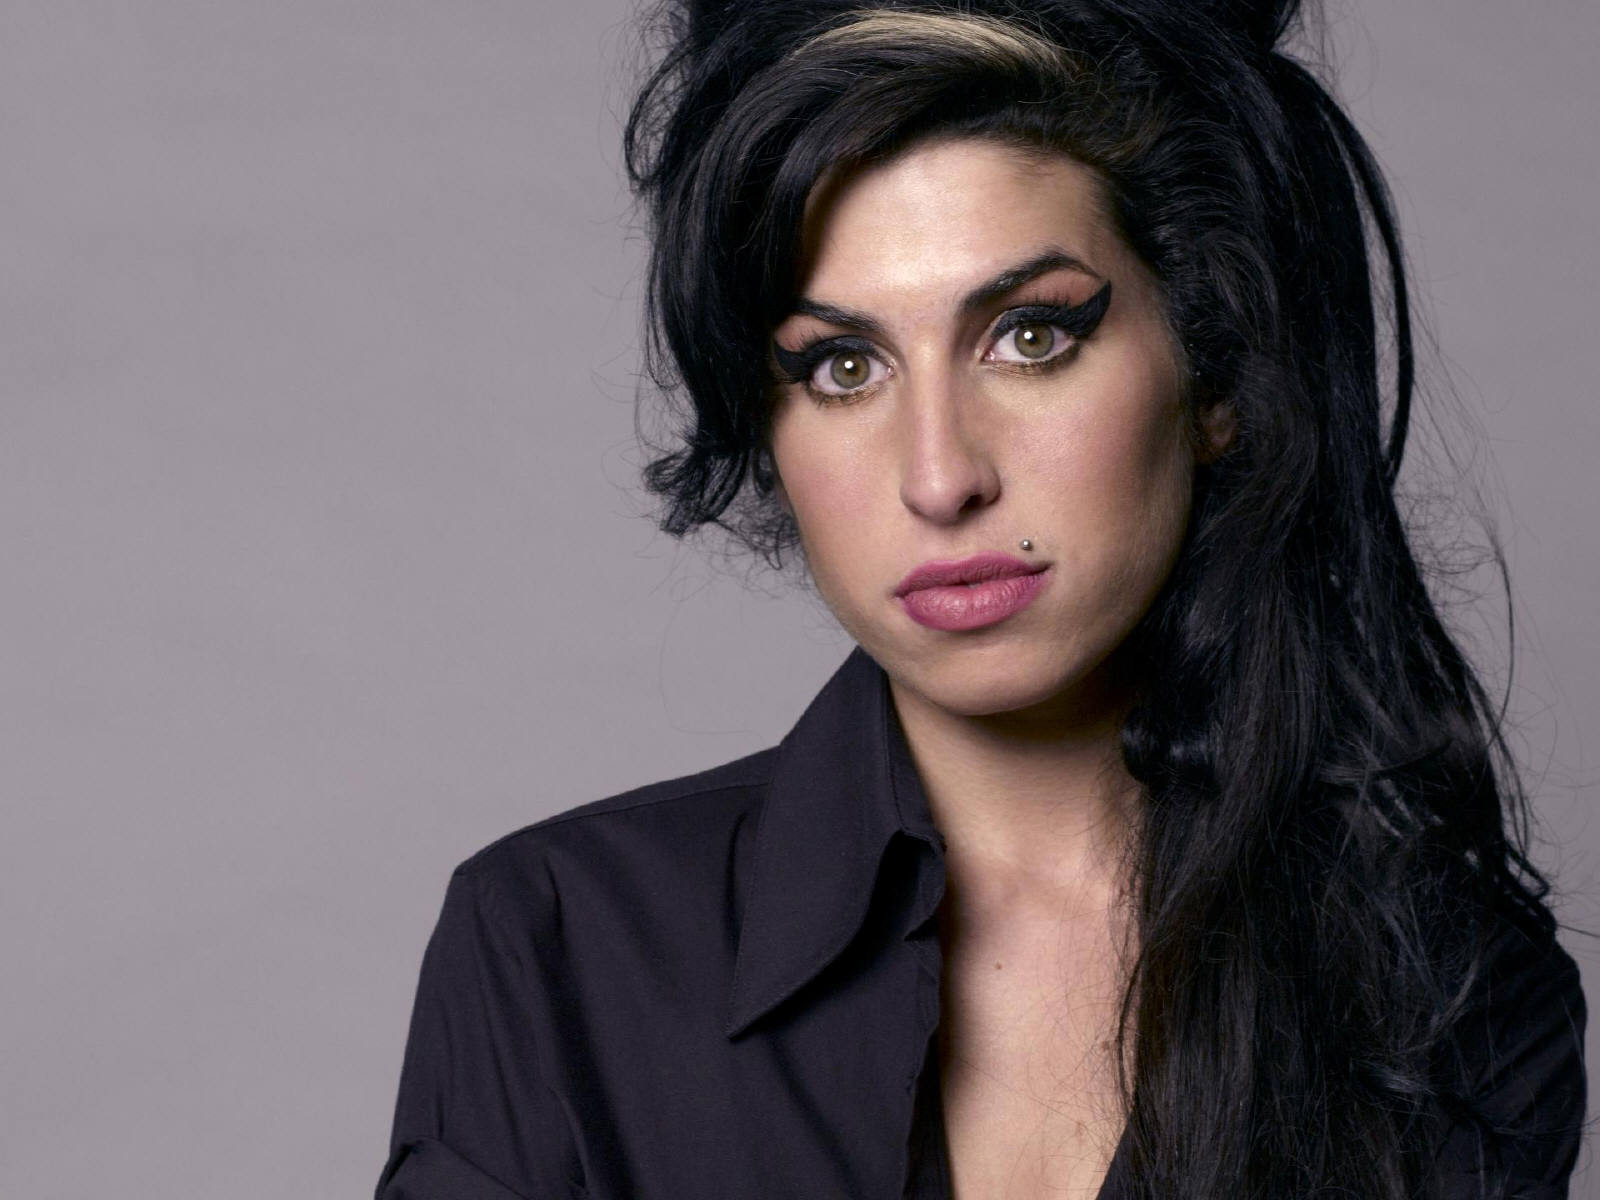 Now Adele is often given the credit for this which as we all know I find to be unfair. Amy Winehouse ...